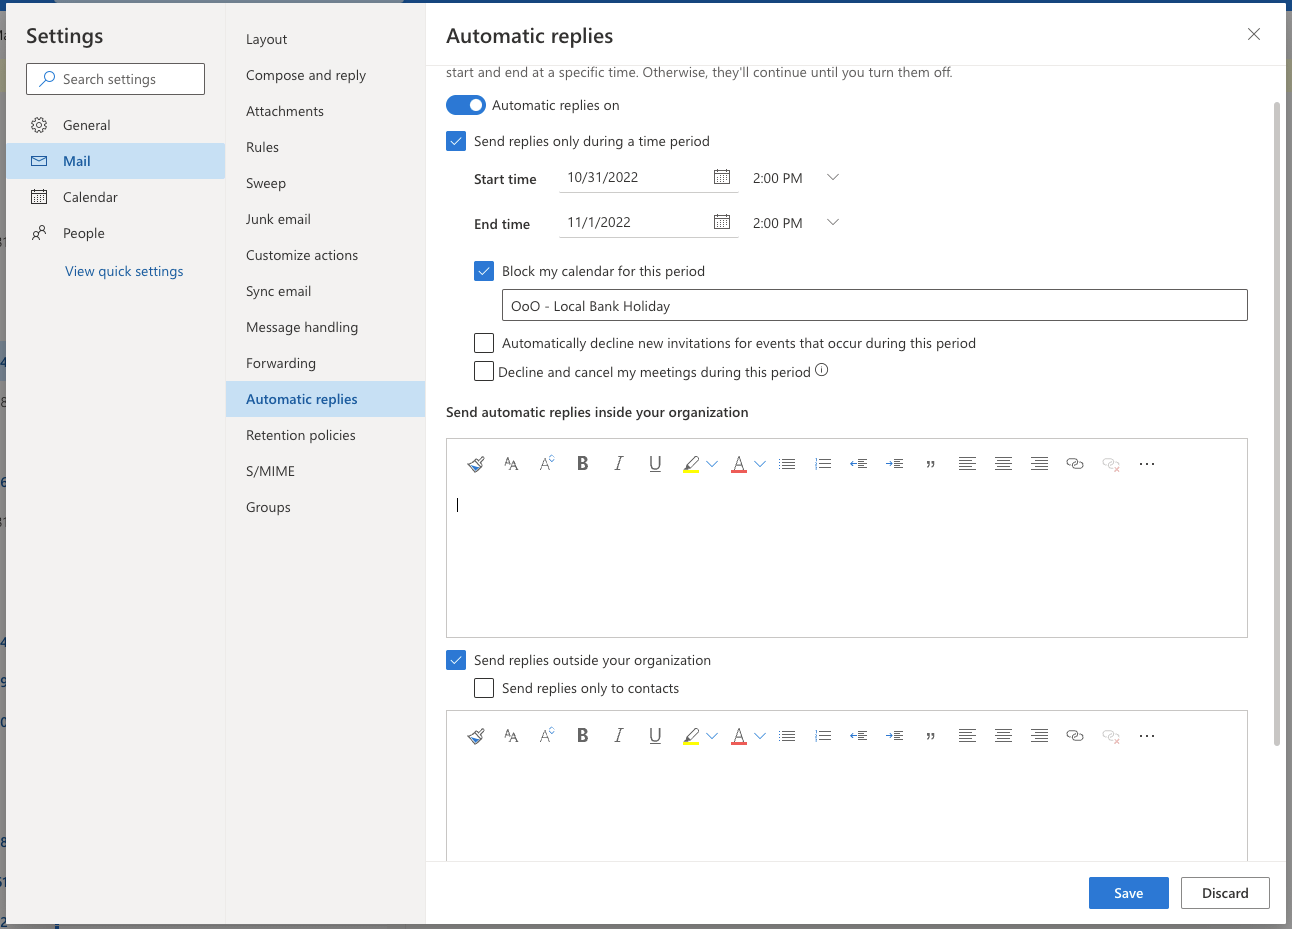 The configuration of automatic replies in Outlook